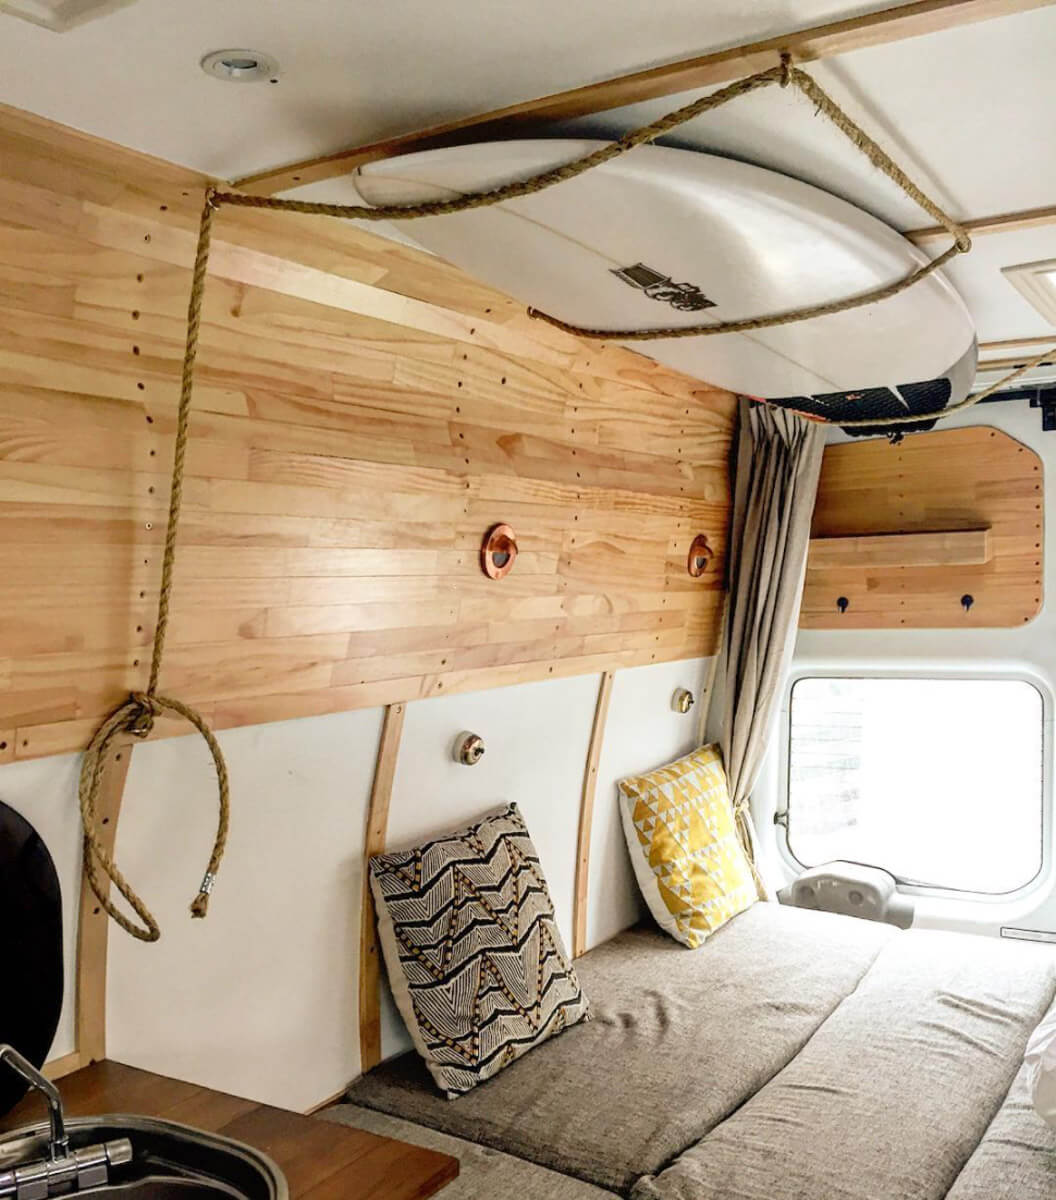 The Best Campervan Storage Ideas: How to Easily Stay Organized On The Road  - Chasing the Wild Goose